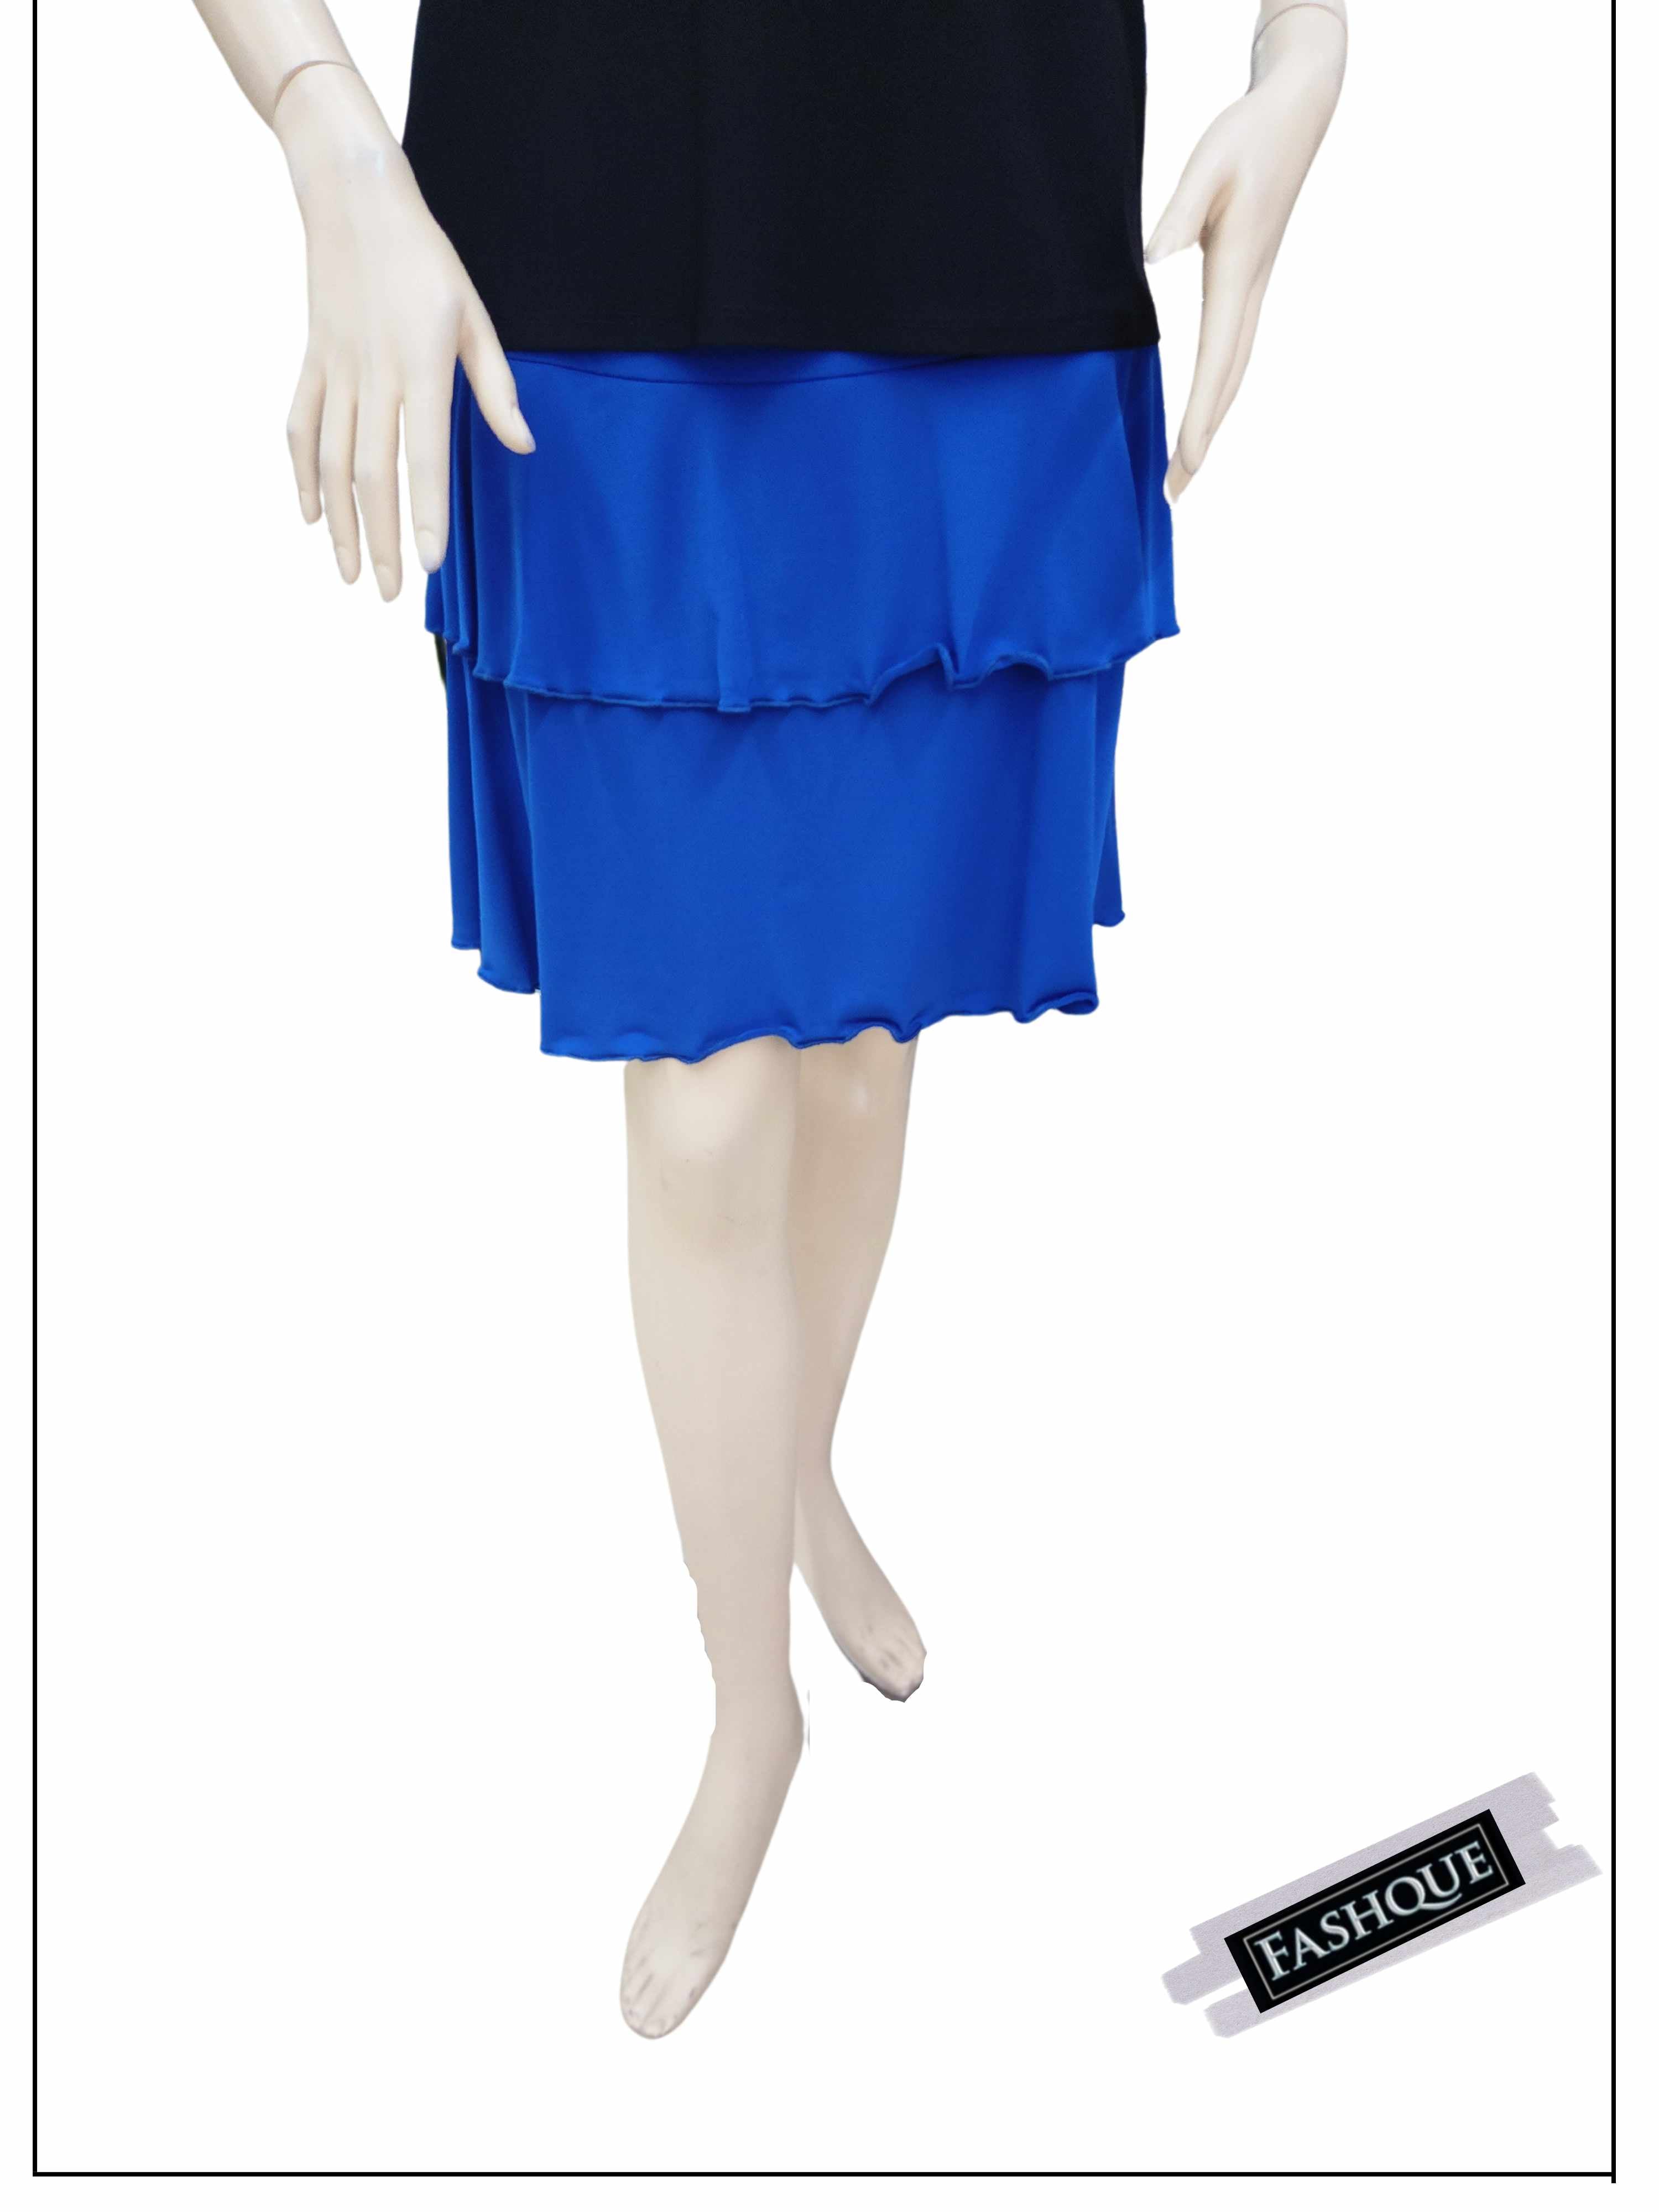 FASHQUE - 3 Tier SOLID SKORT with the Ruffle in the center - SH001